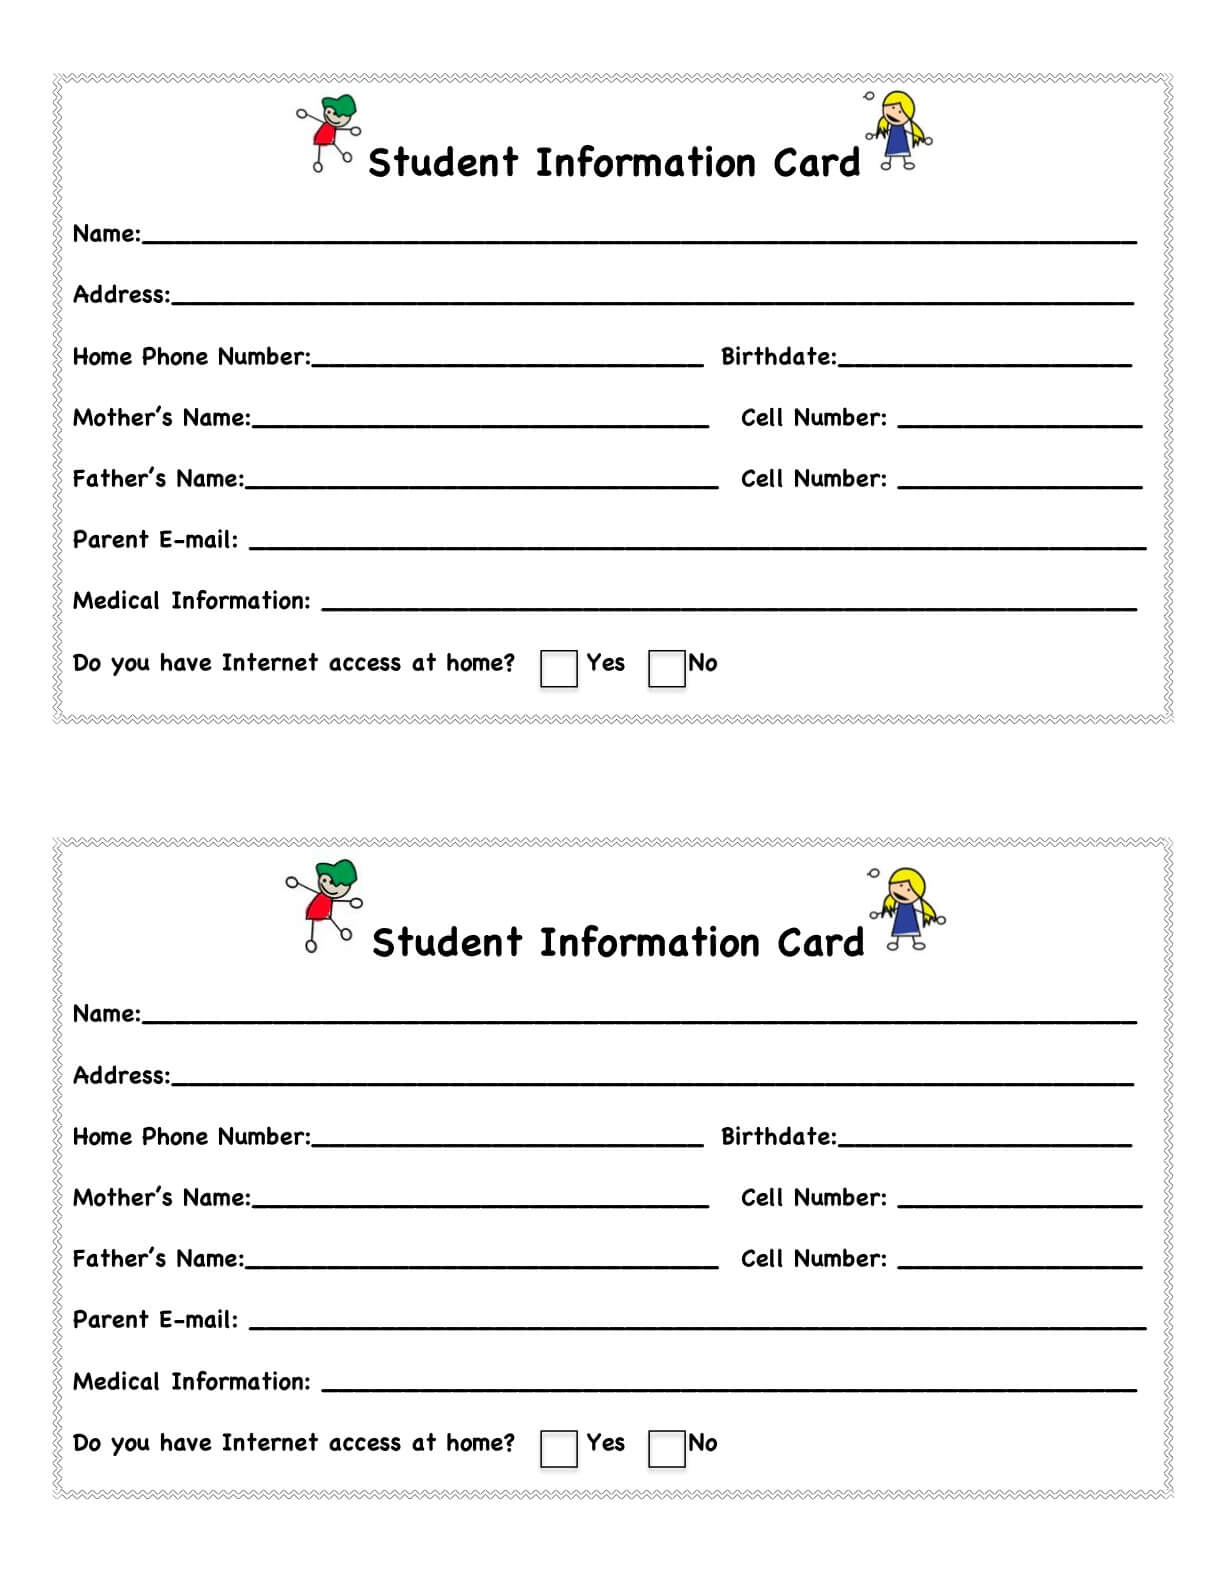 Student Information Card Template ] – Back To School In Student Information Card Template